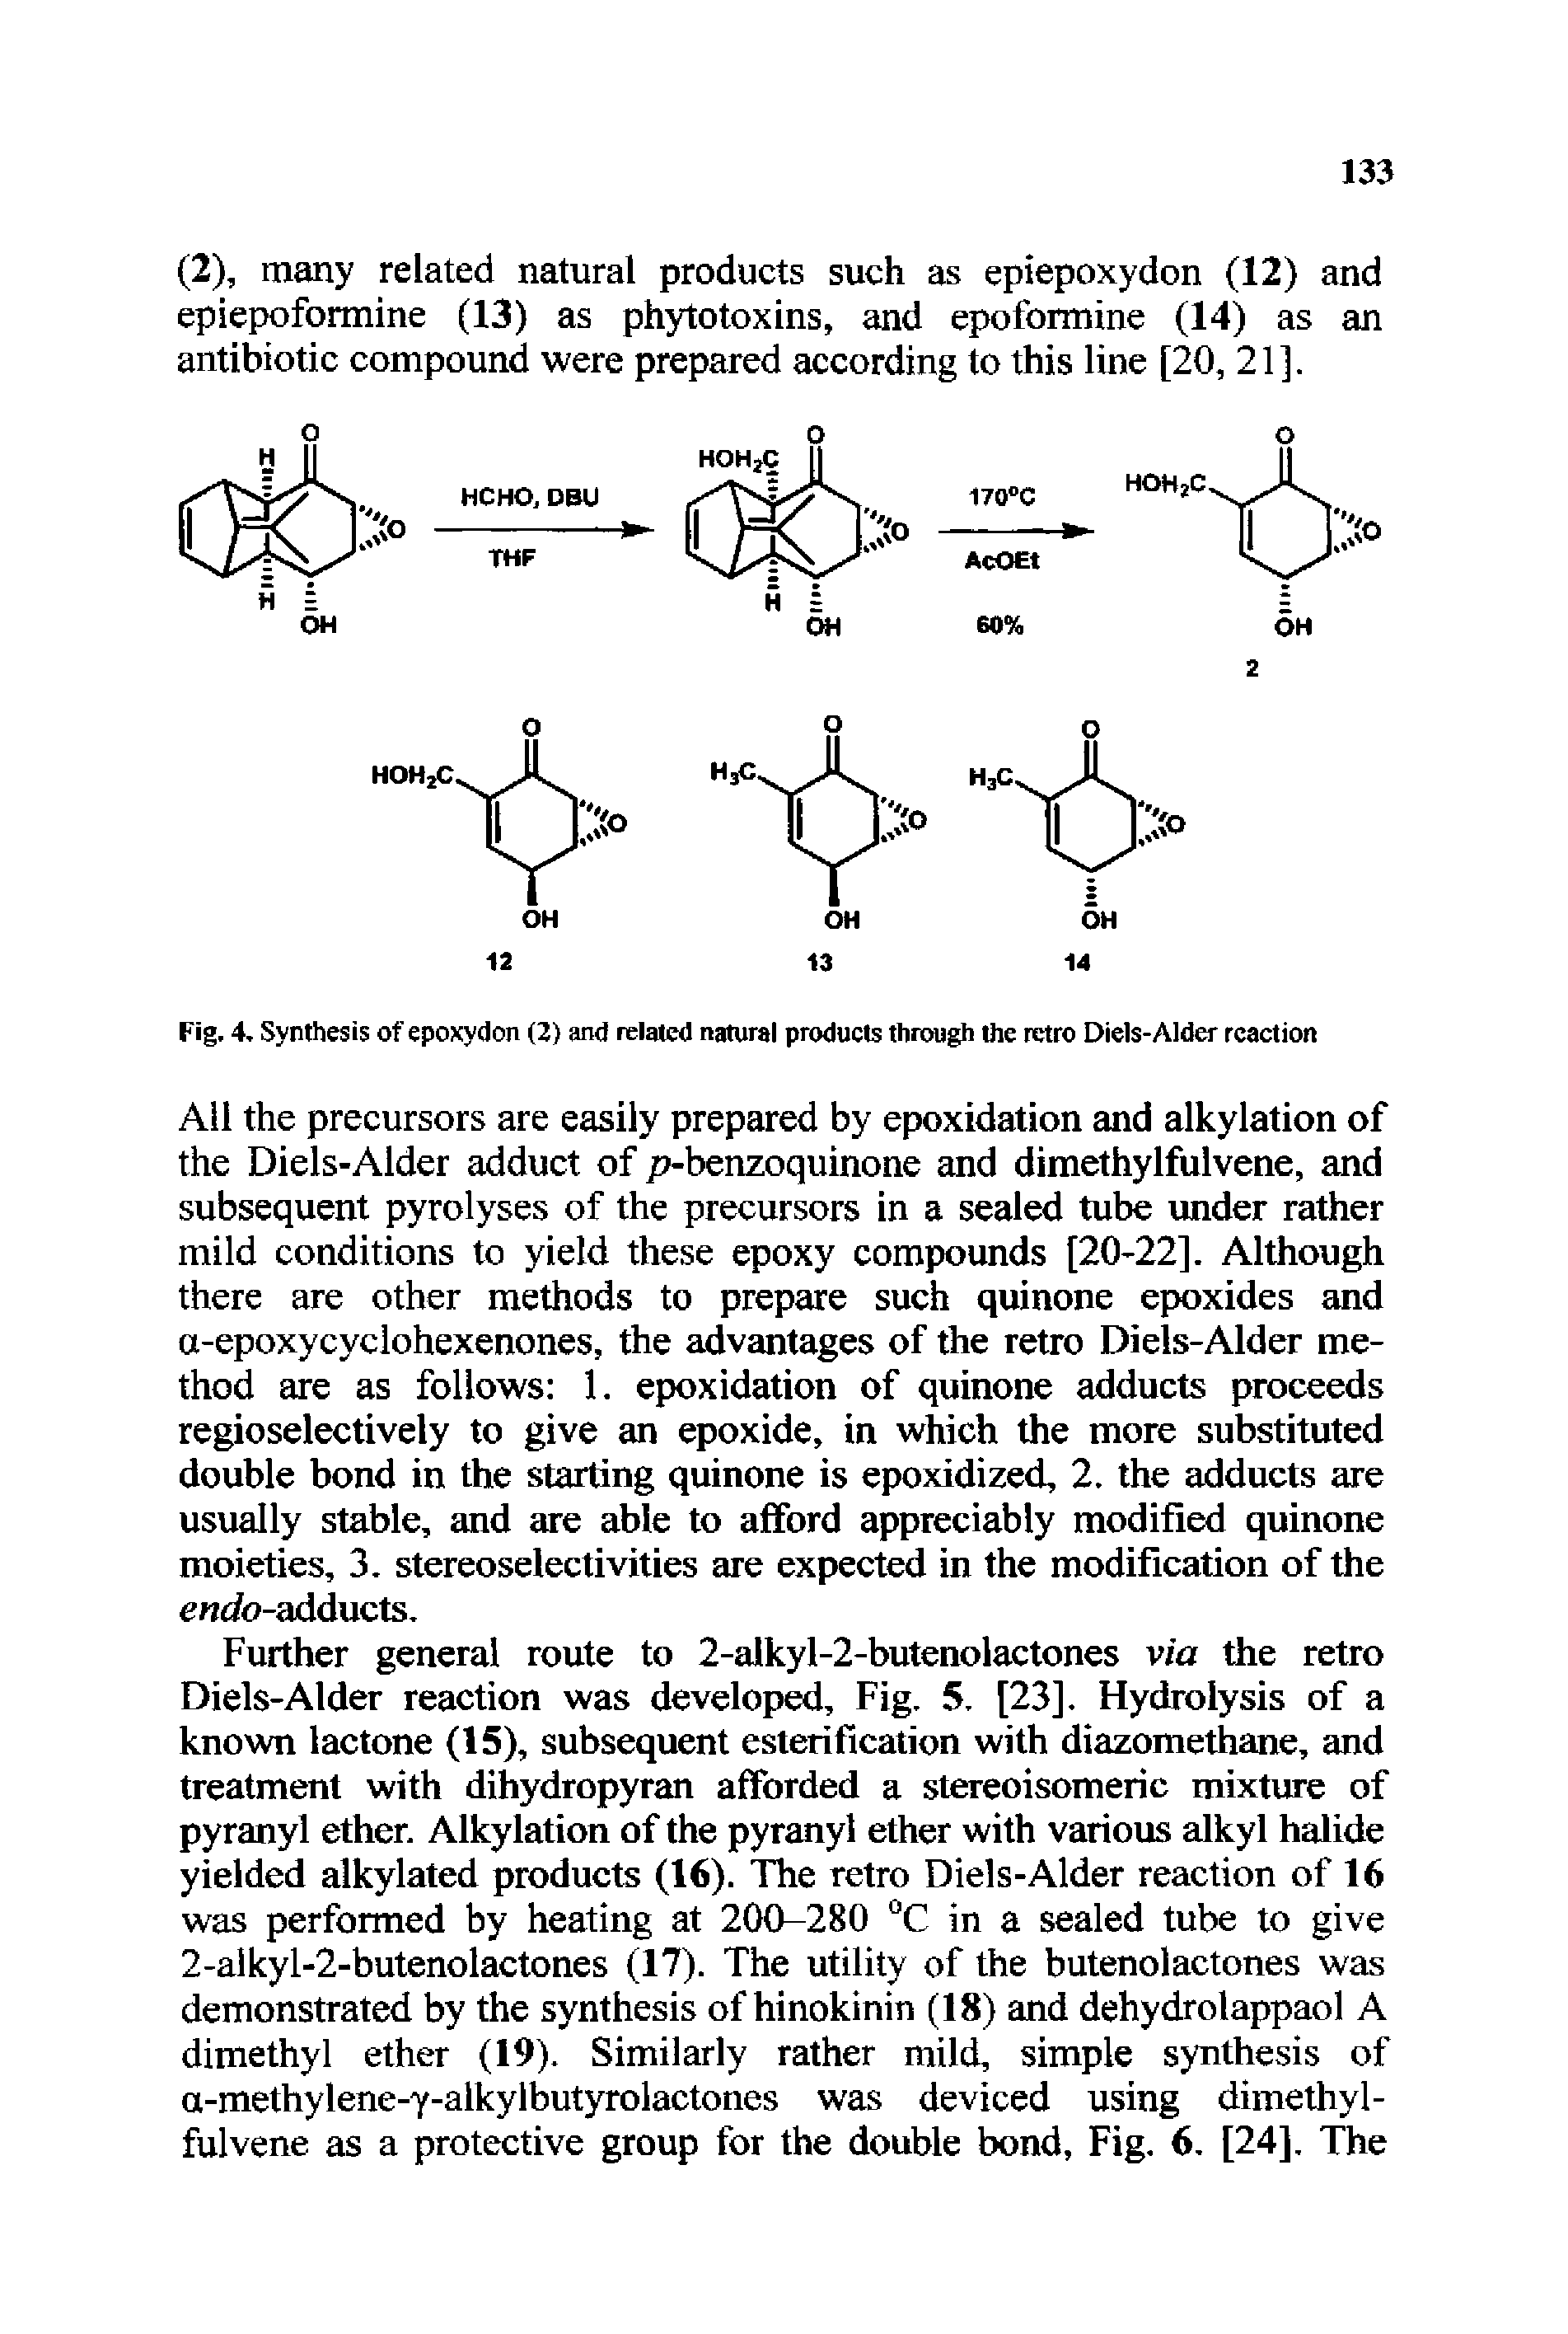 Fig. 4. Synthesis of epoxydon (2) and related natural products through the retro Diels-Alder reaction...